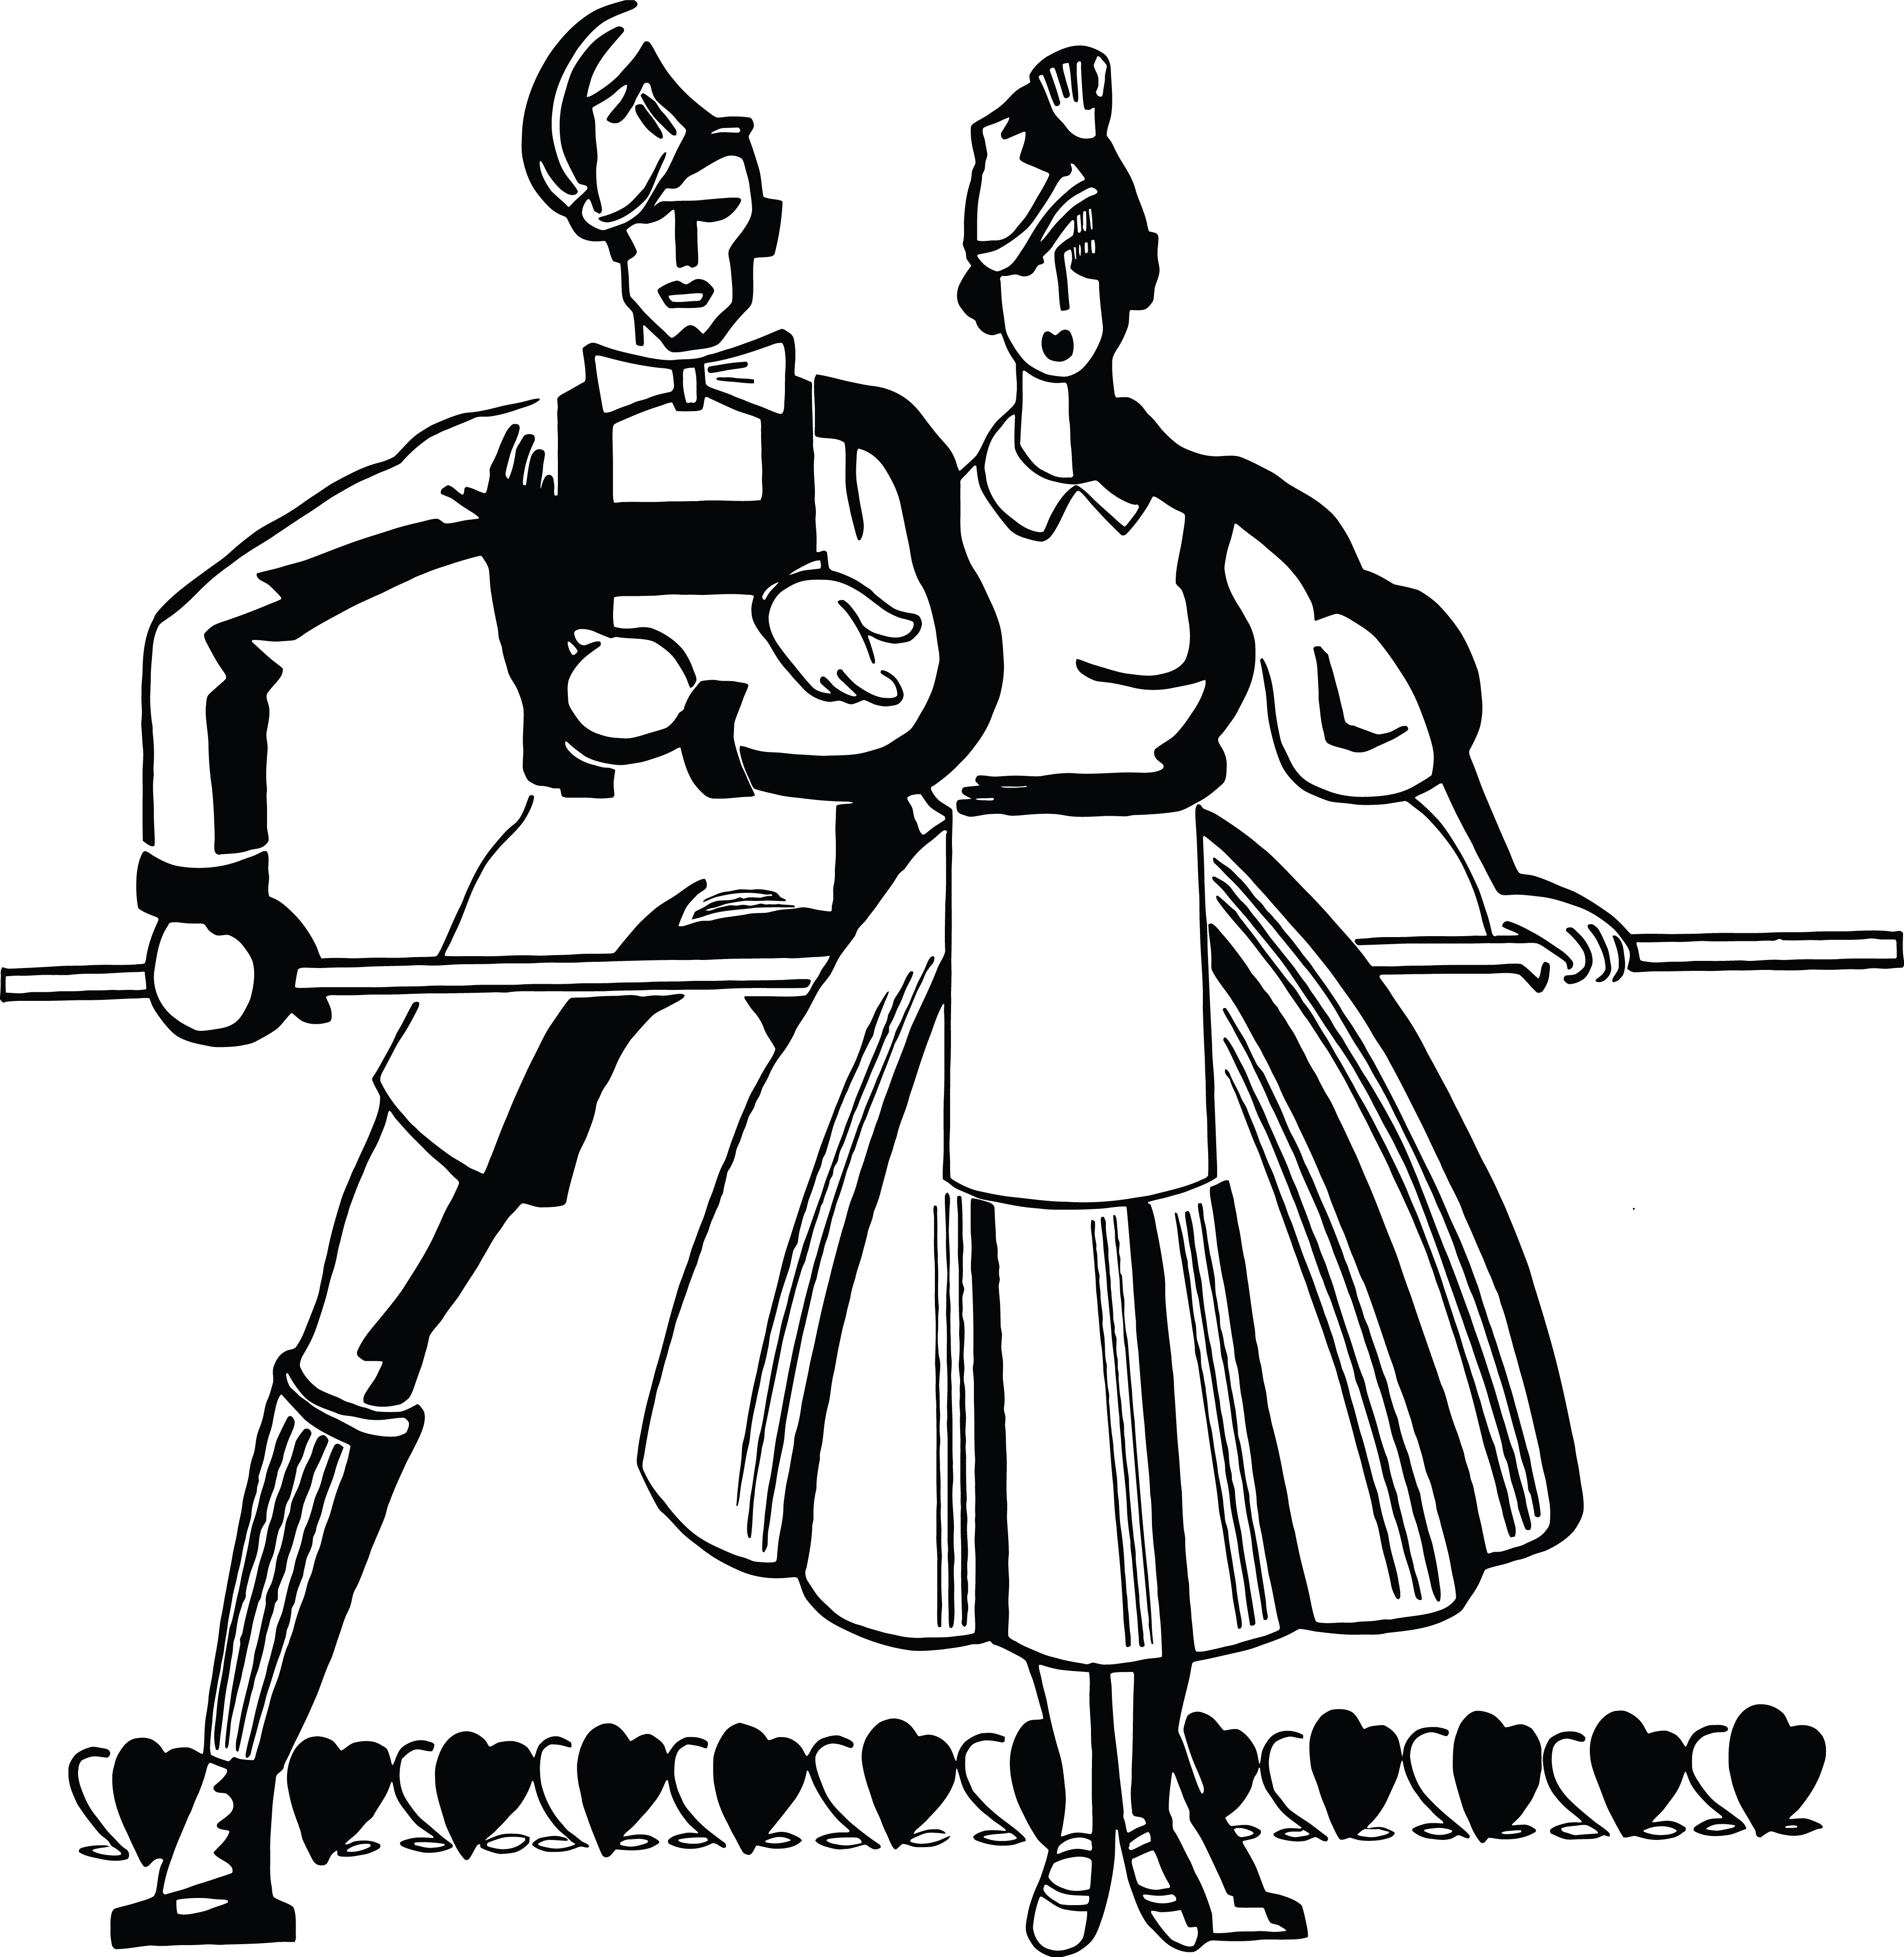 dancing couple clipart black and white